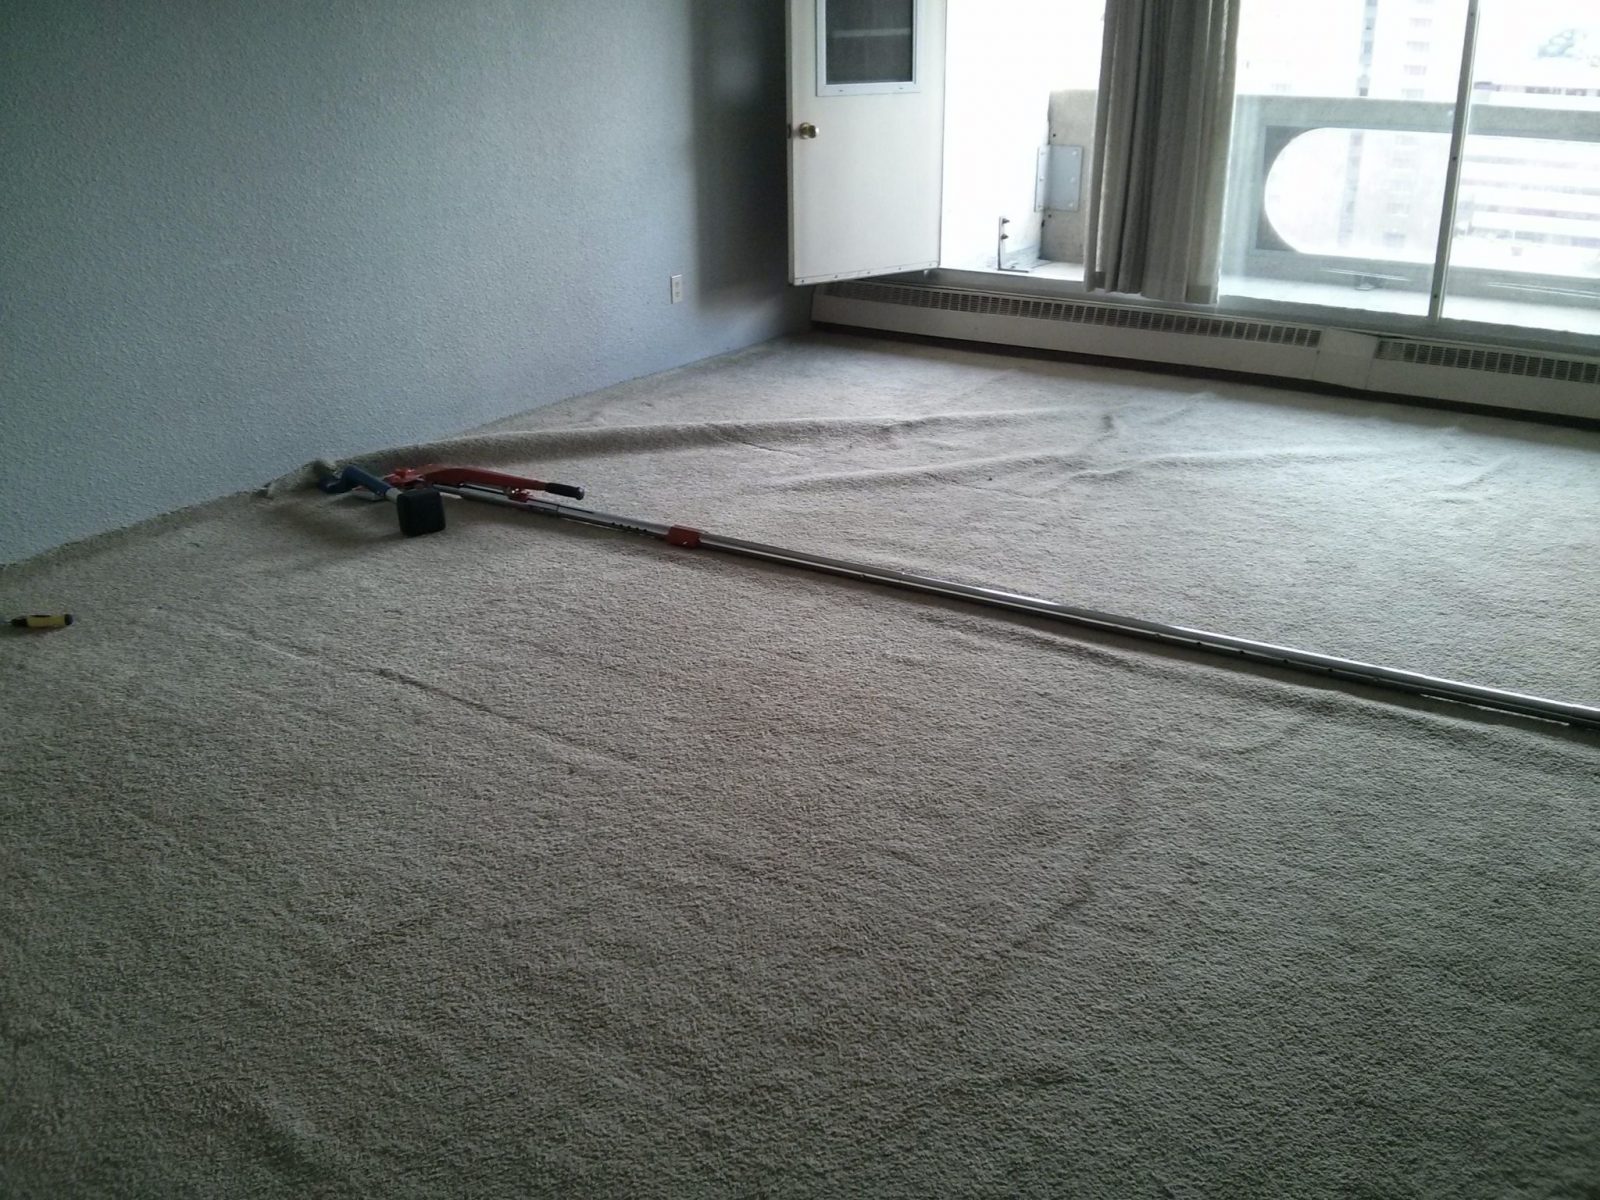 Stretching a carpet in high rise condos and apartments